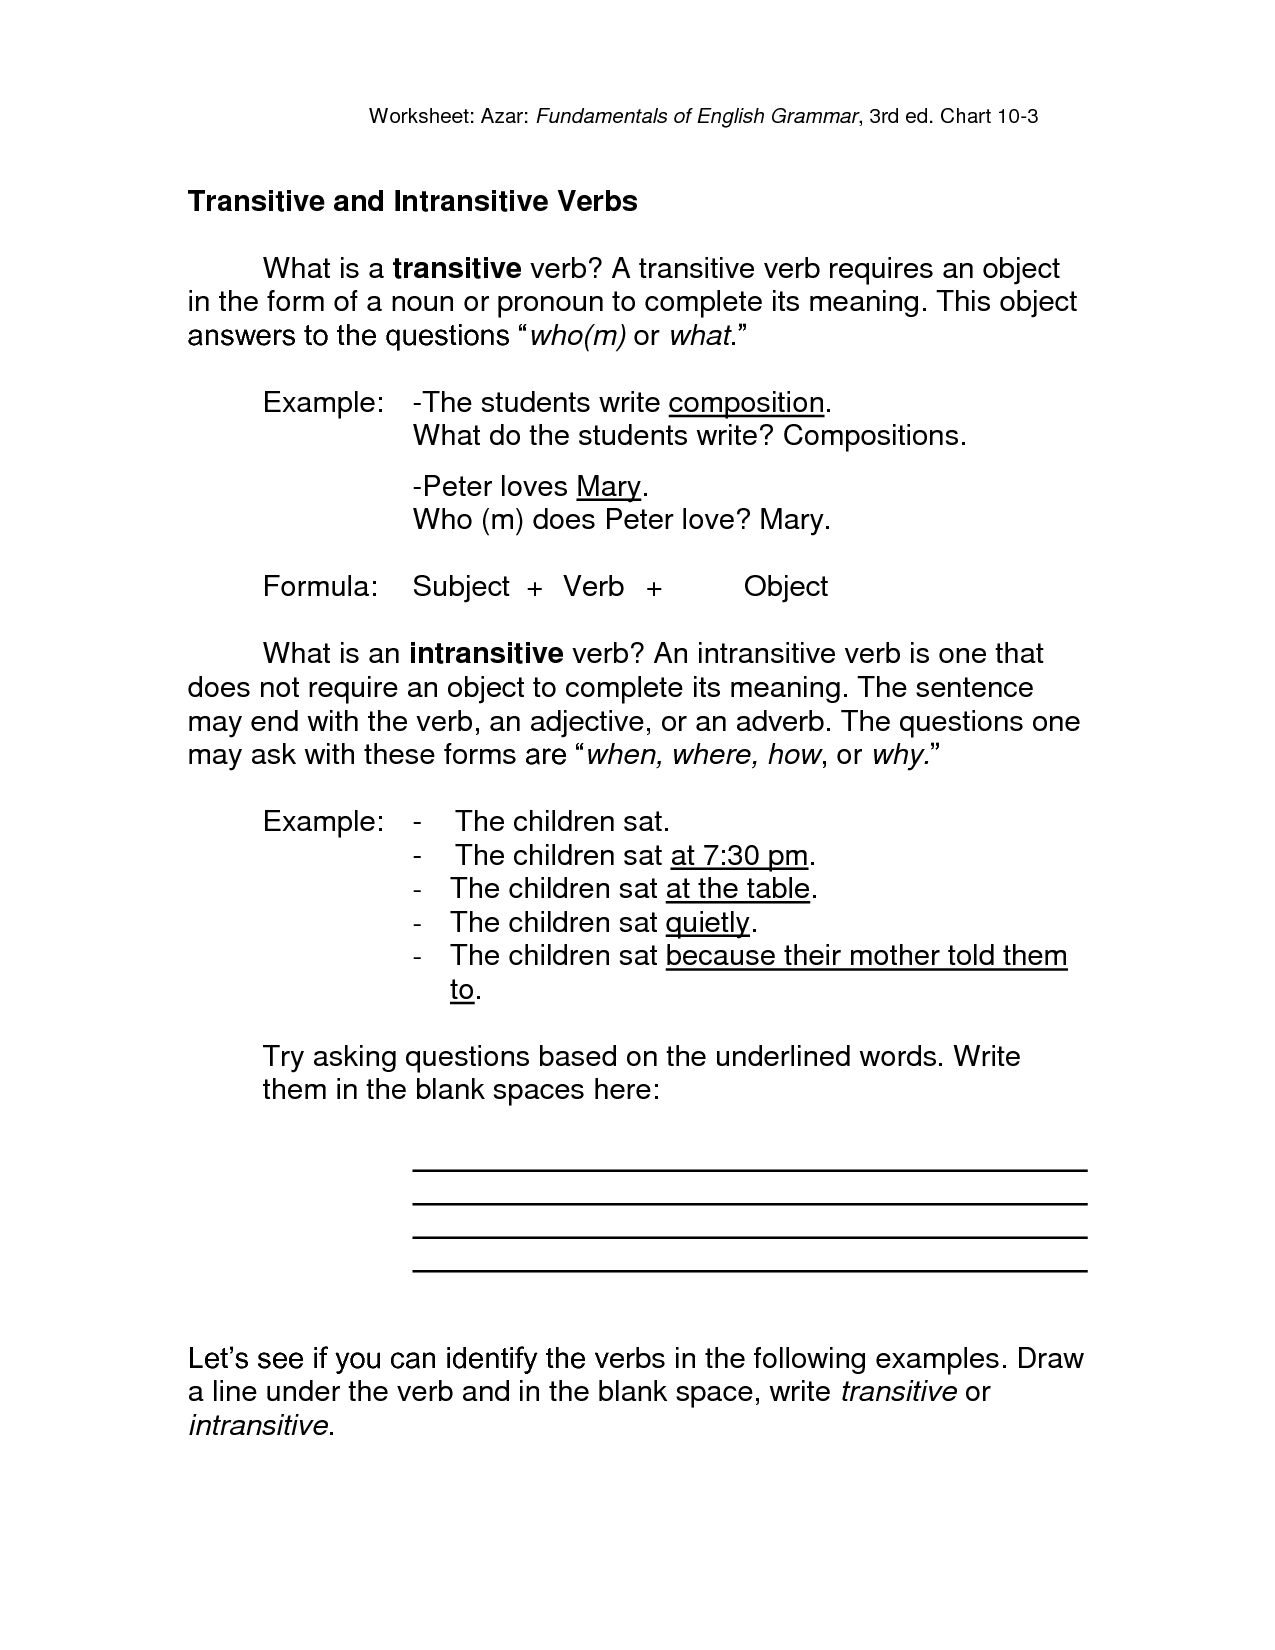 transitive-and-intransitive-verbs-worksheet